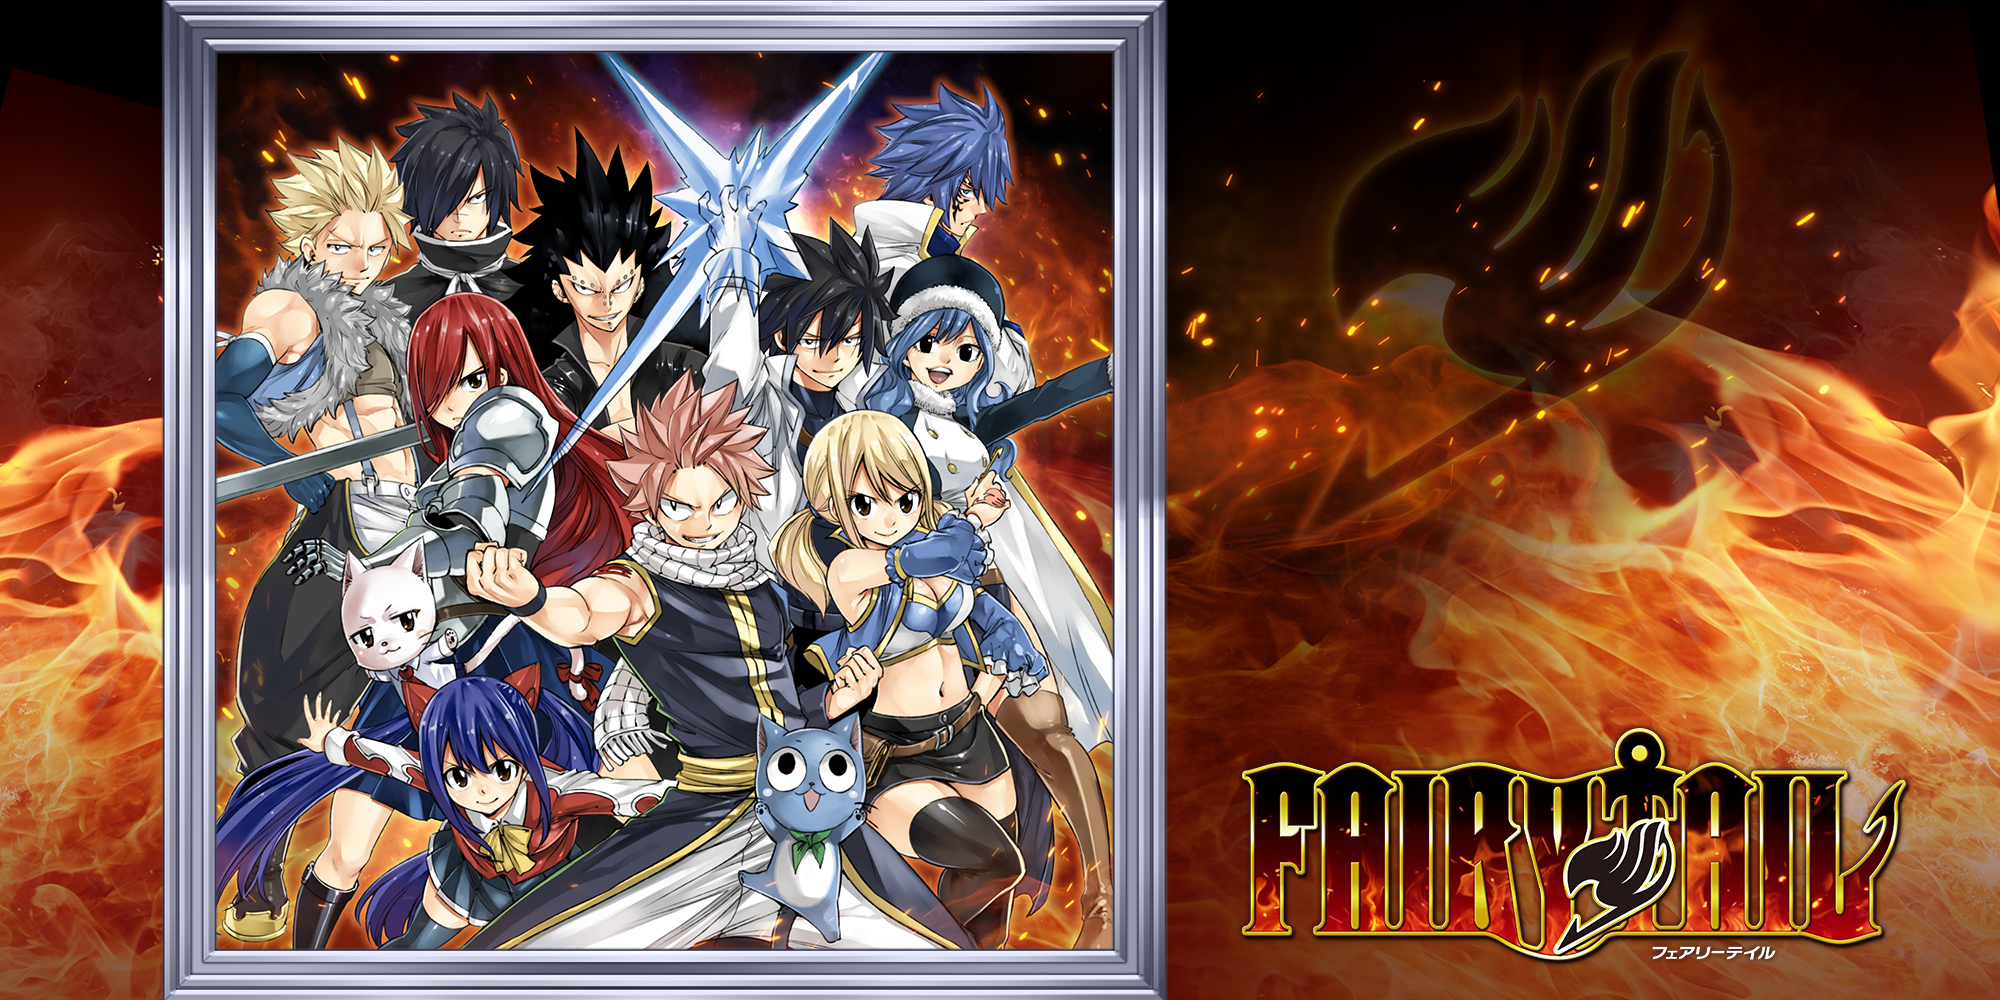 FAIRY TAIL, Nintendo Switch games, Games